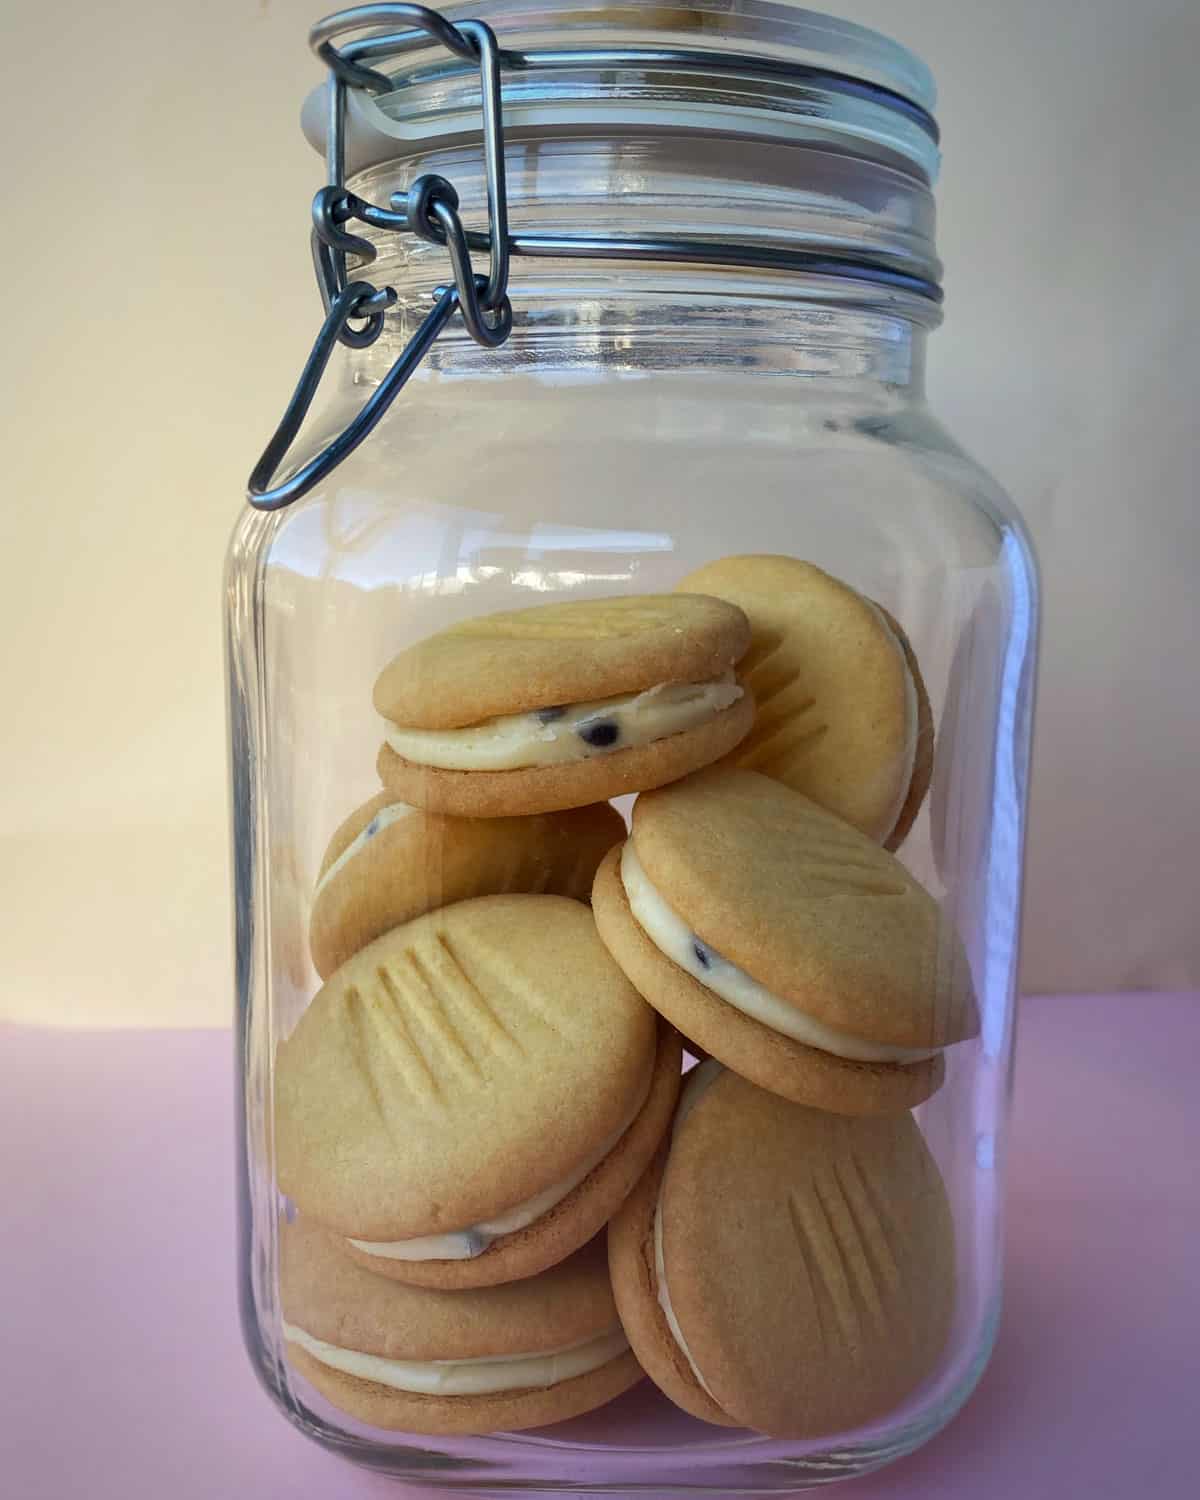 Yoyo biscuits stored in a glass jar.